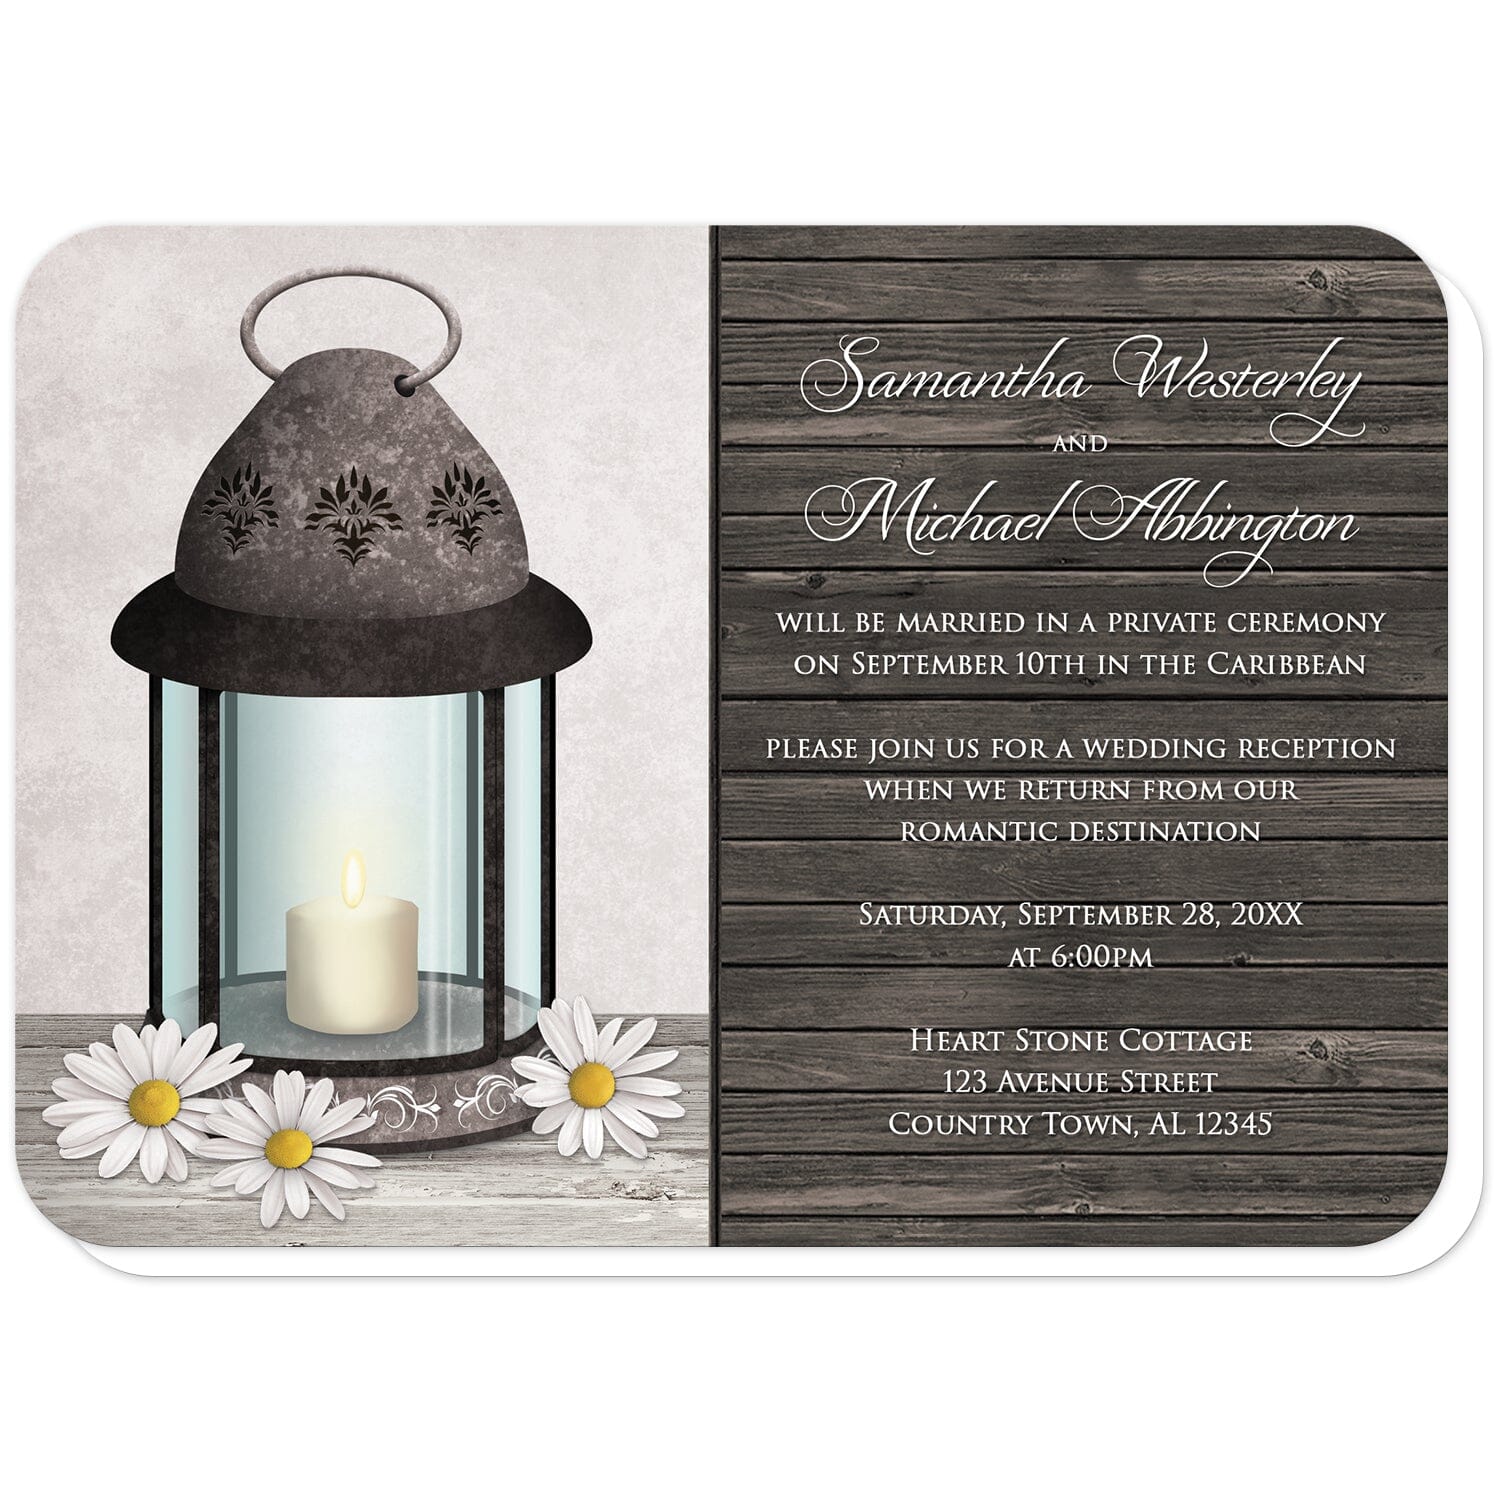 Rustic Daisy Lantern Wood Reception Only Invitations (with rounded corners) at Artistically Invited. Country-inspired rustic daisy lantern wood reception only invitations with an old rustic but elegant ornate metal lantern illustration with a lit candle inside, daisies around it on a light wood tabletop, in front of a rustic light gray background on the left side of the invitations. You personalized post-wedding reception details are custom printed in white over a dark wood pattern on the right side.